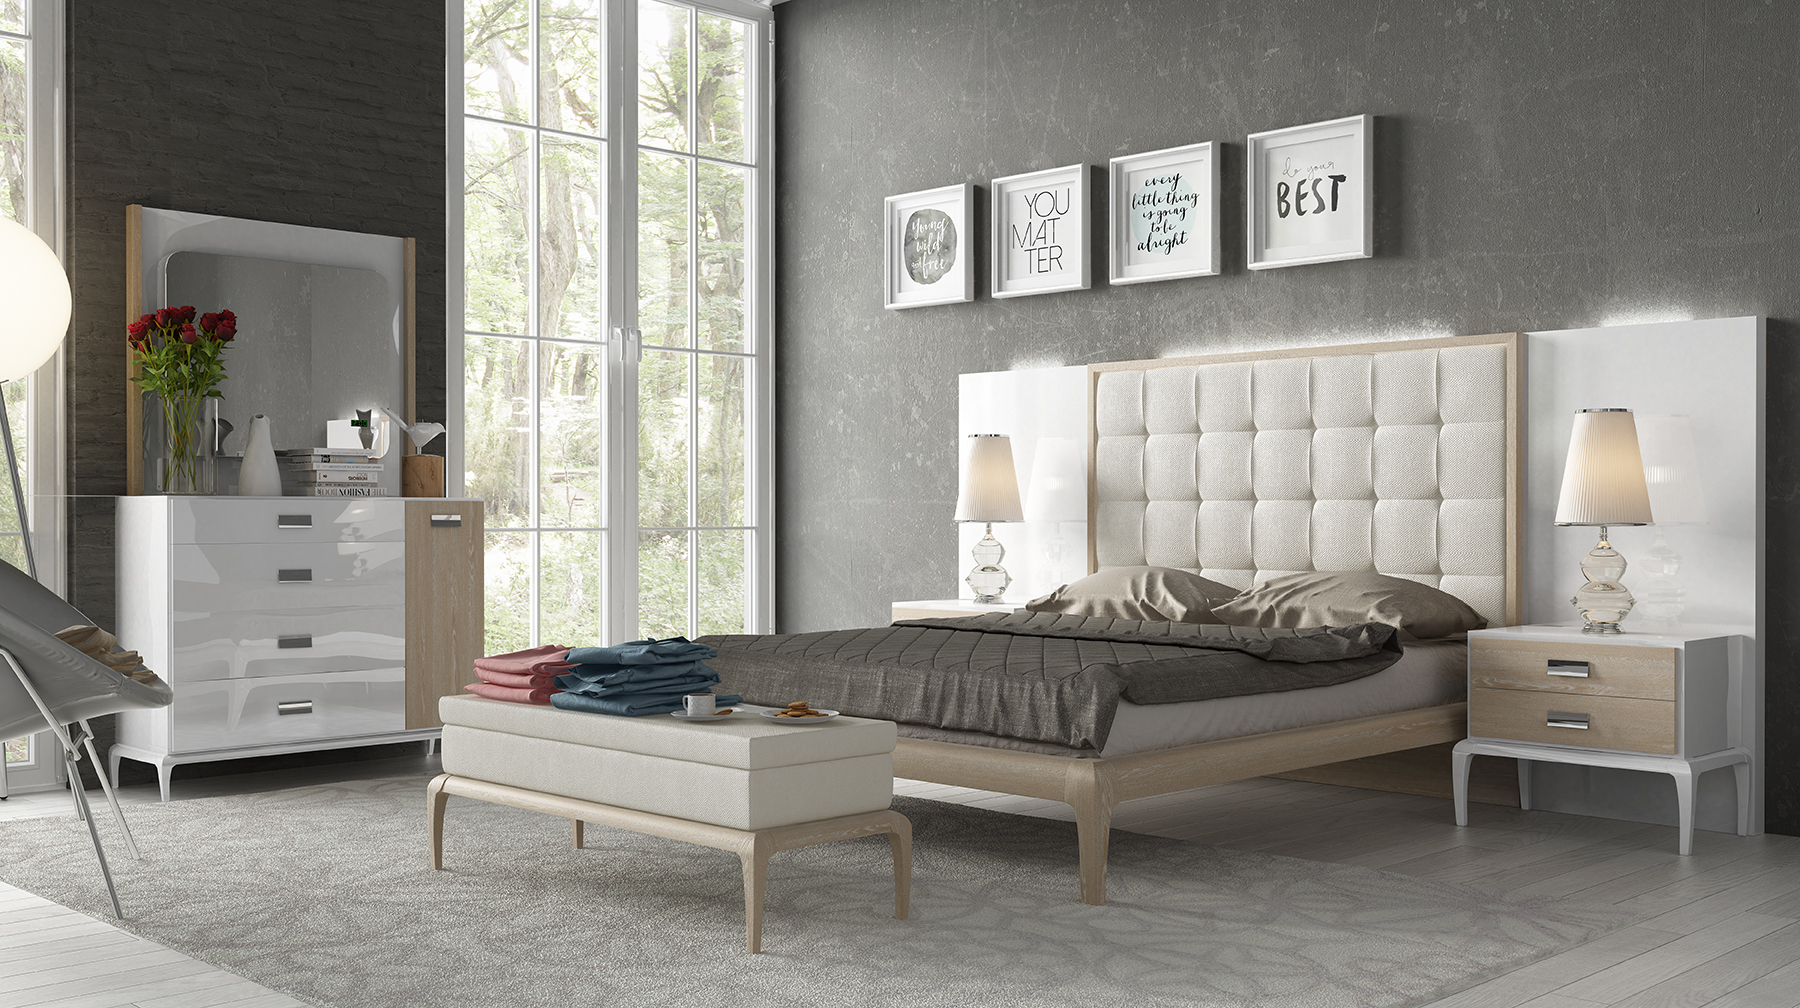 Stylish Wood High End Bedroom Furniture With Extra Storage within proportions 1800 X 1008